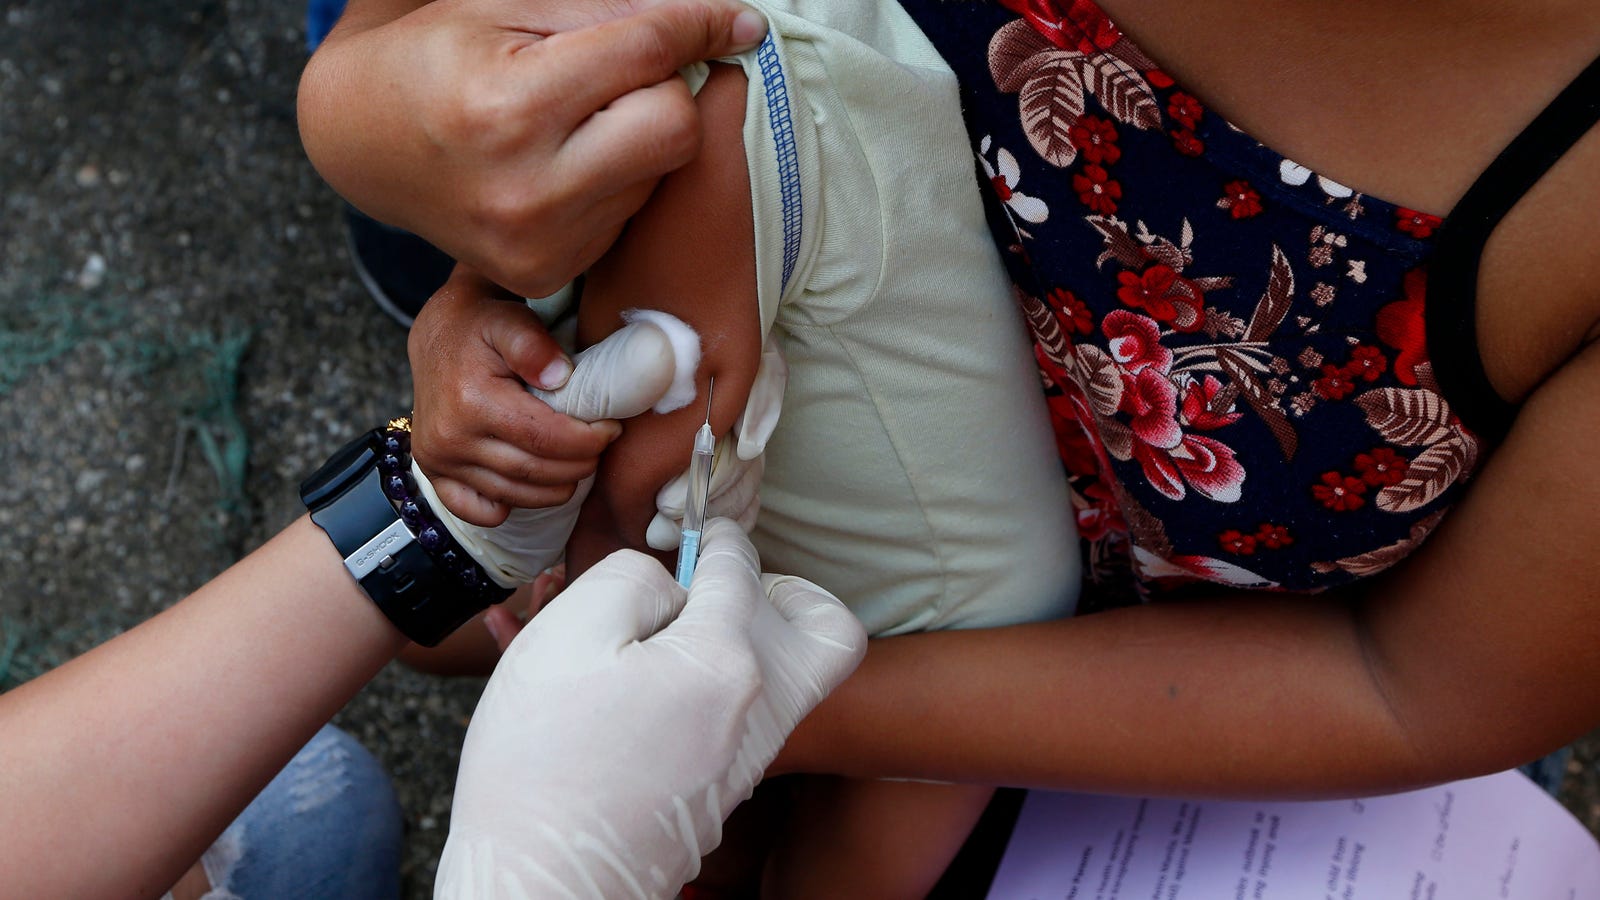 photo of 136 People Have Died in Measles Outbreak in the Philippines Linked to Vaccination Fears, Official Says image